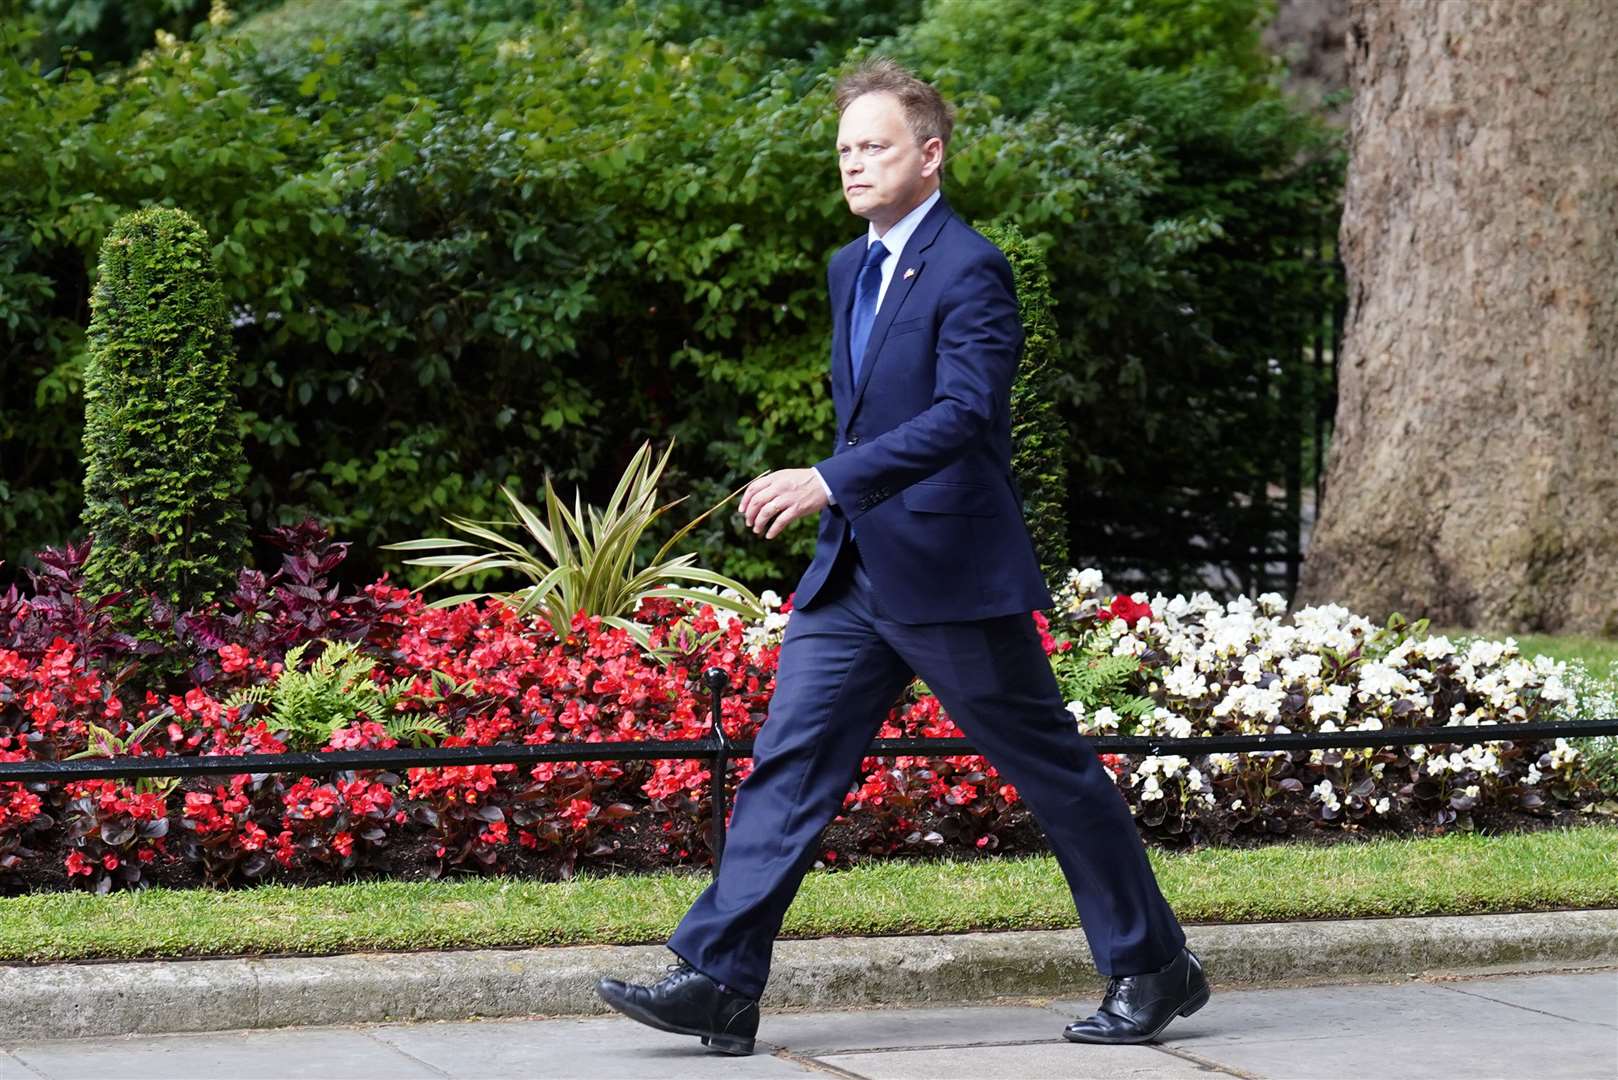 Nadhim Zahawi is up against fellow Cabinet minister Grant Shapps in the race for Tory leader (Stefan Rousseau/PA)